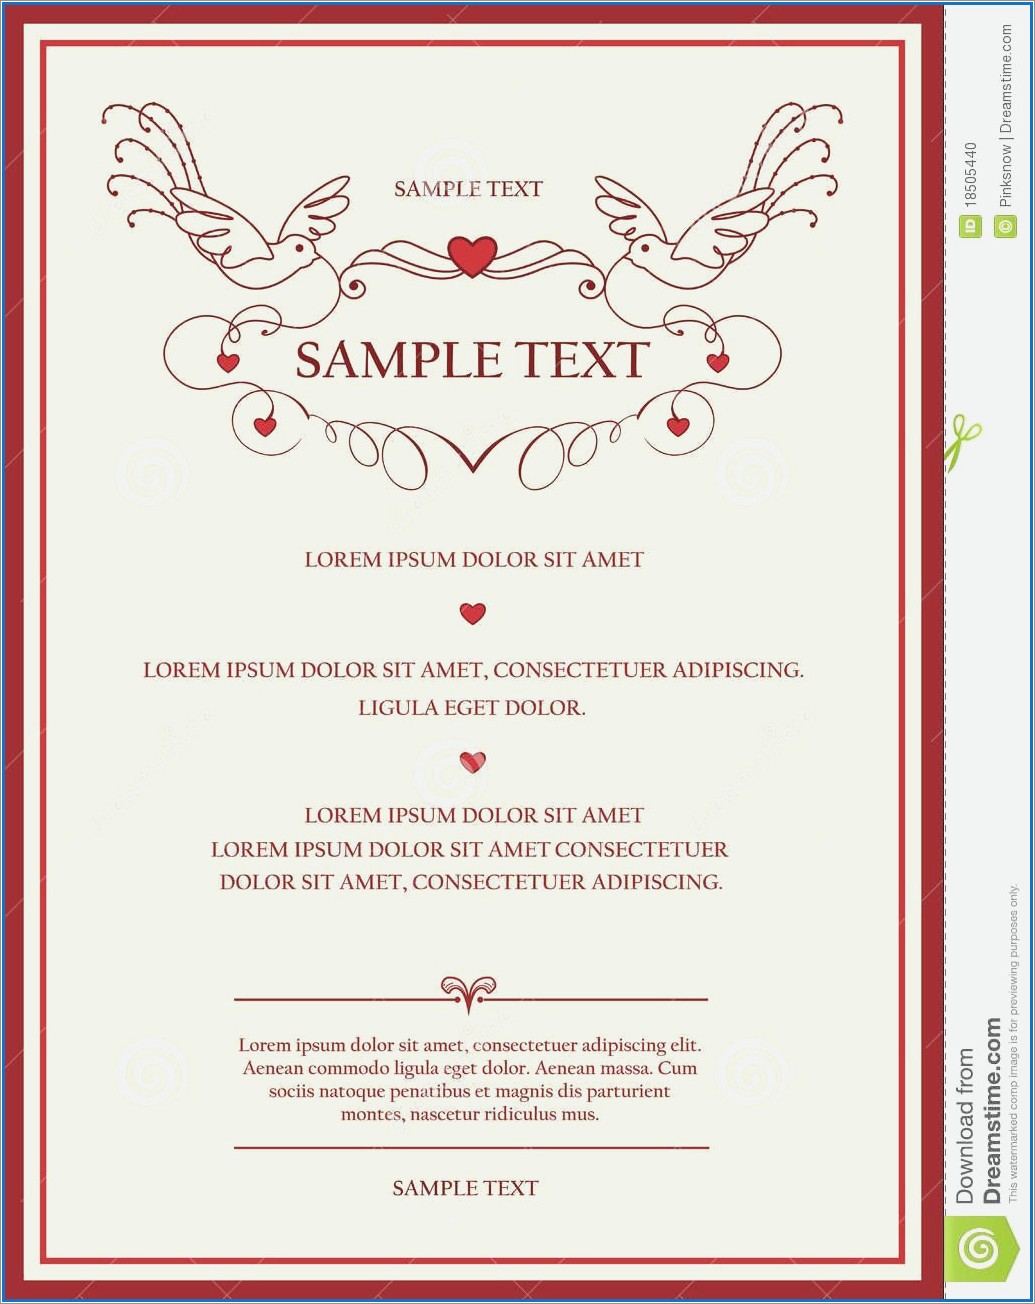 Grand Opening Invitation Card Design Png